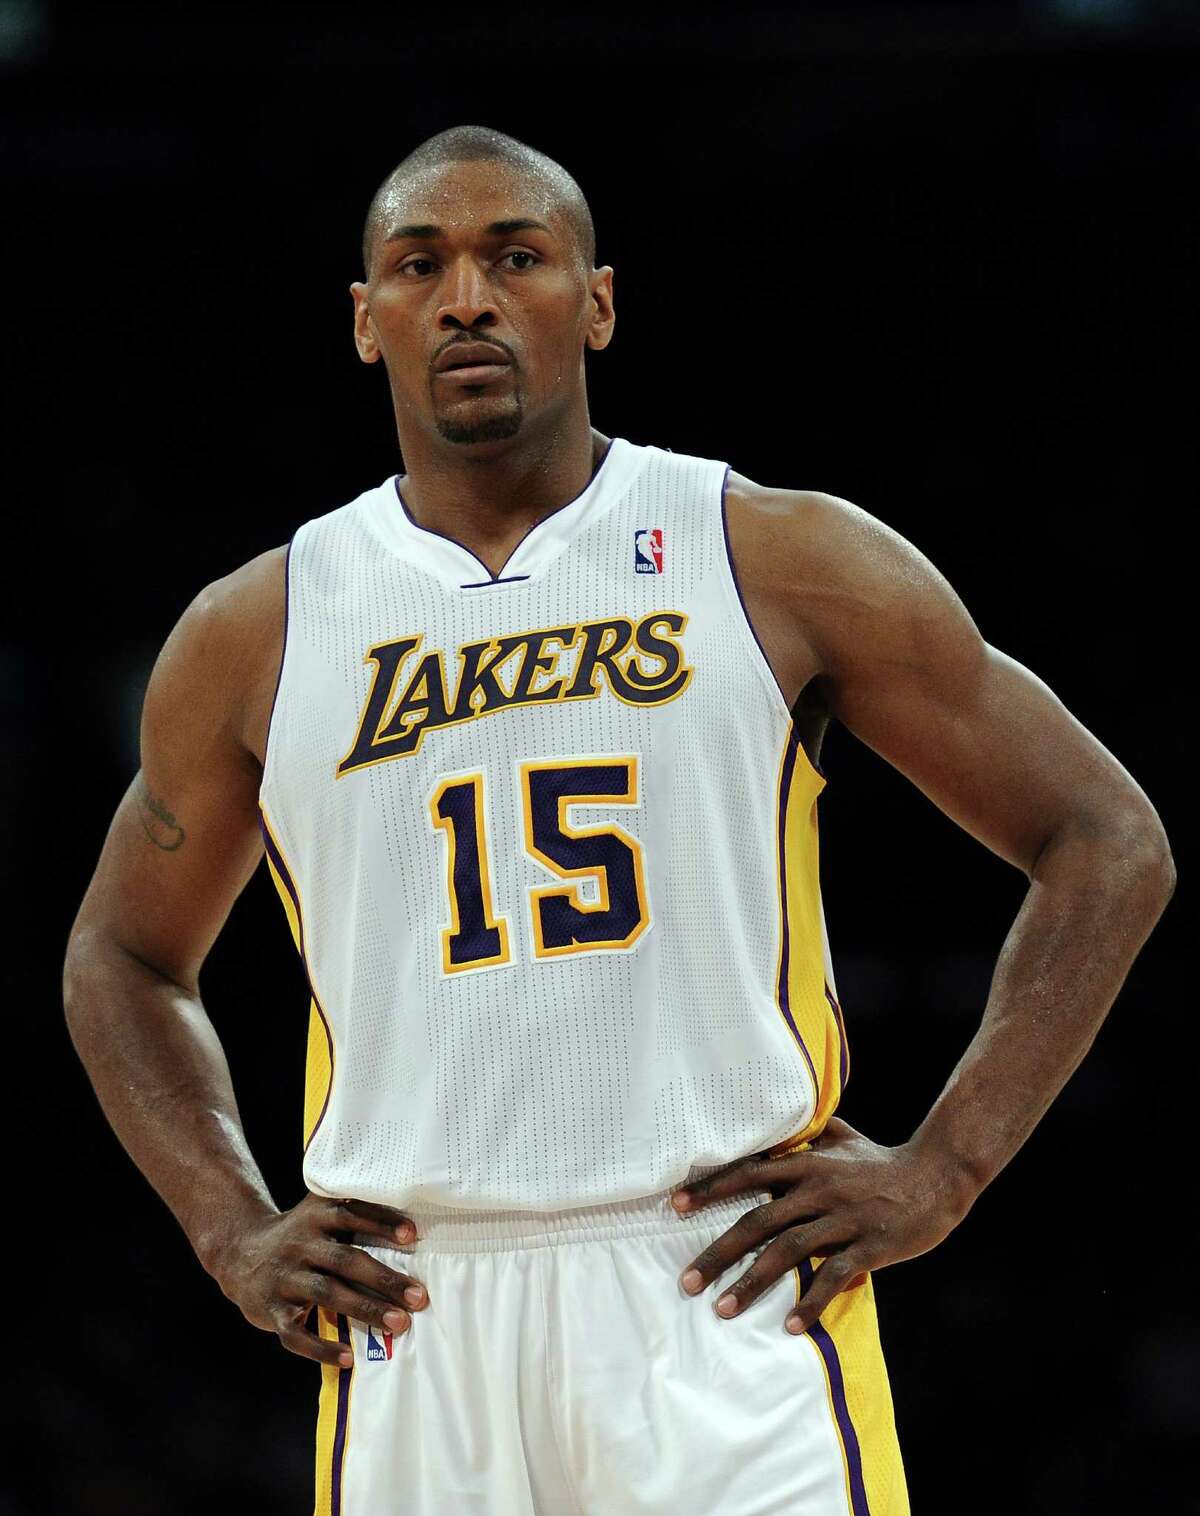 Metta World Peace levels James Harden with an elbow on Make a GIF